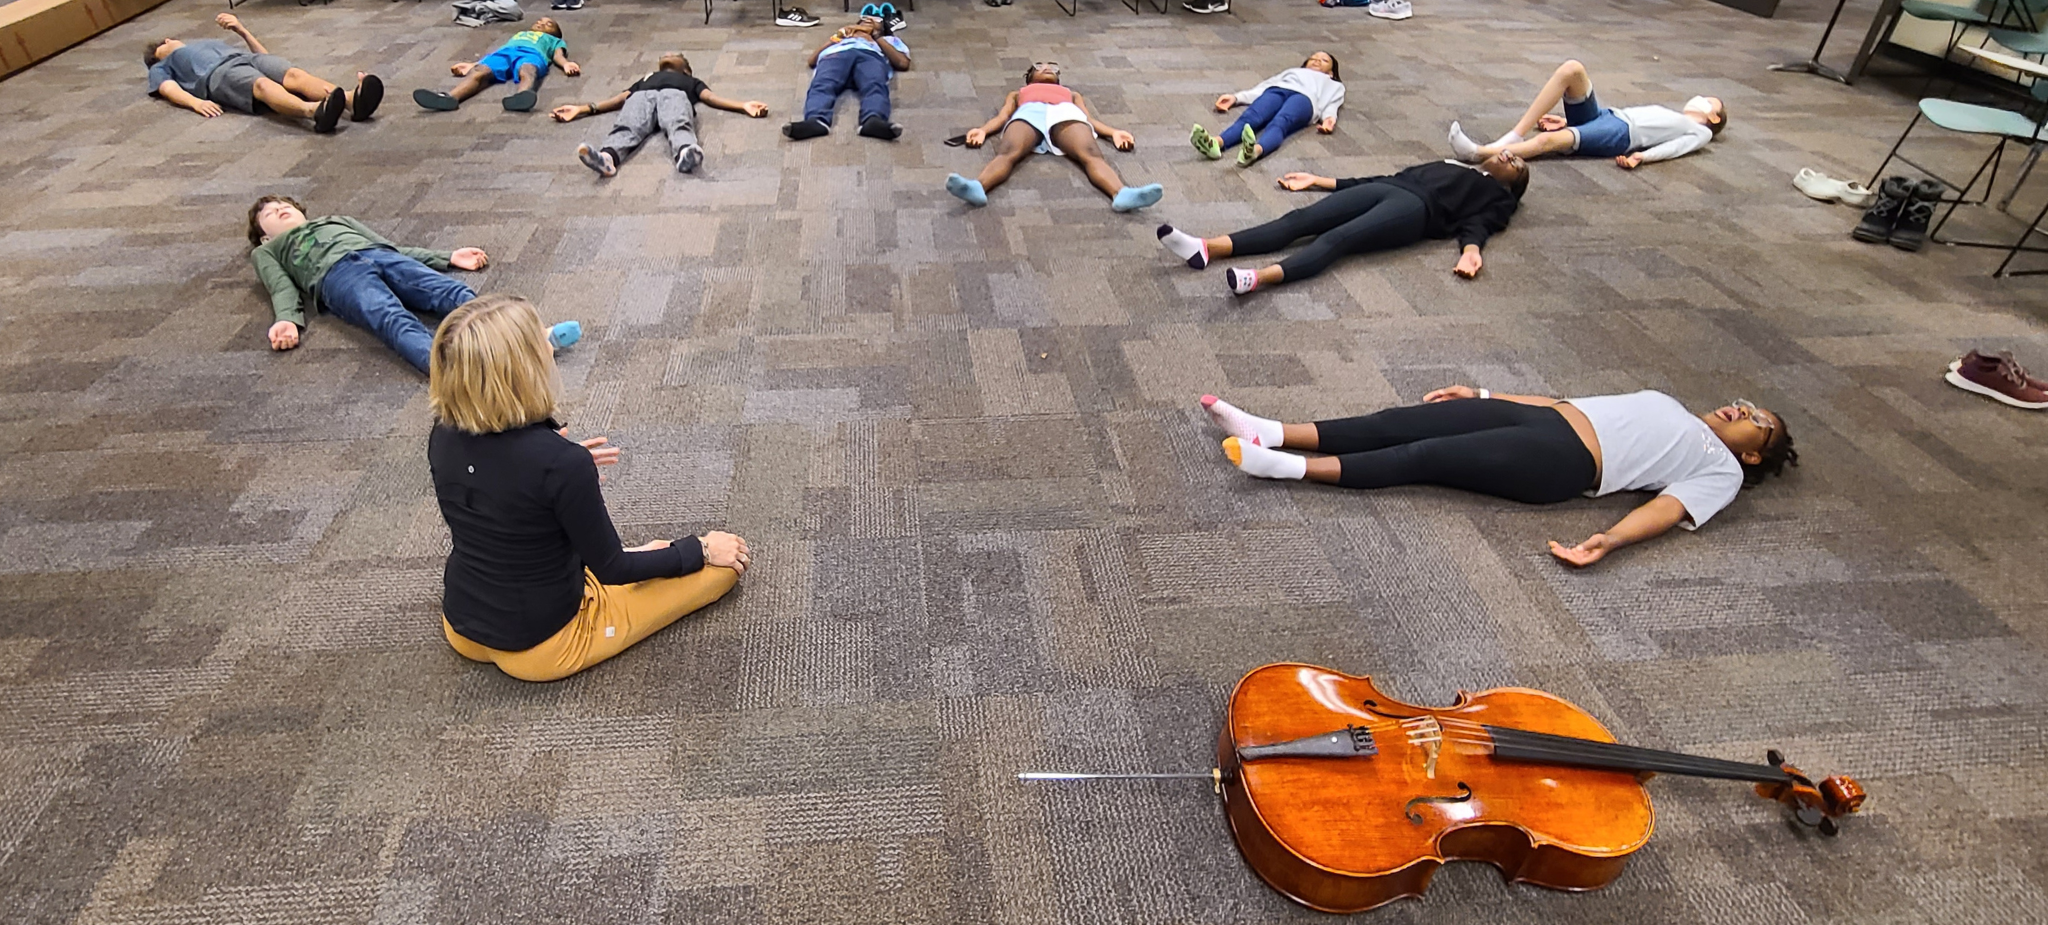 Group photo of young musicians at a "University Adventure" yoga class